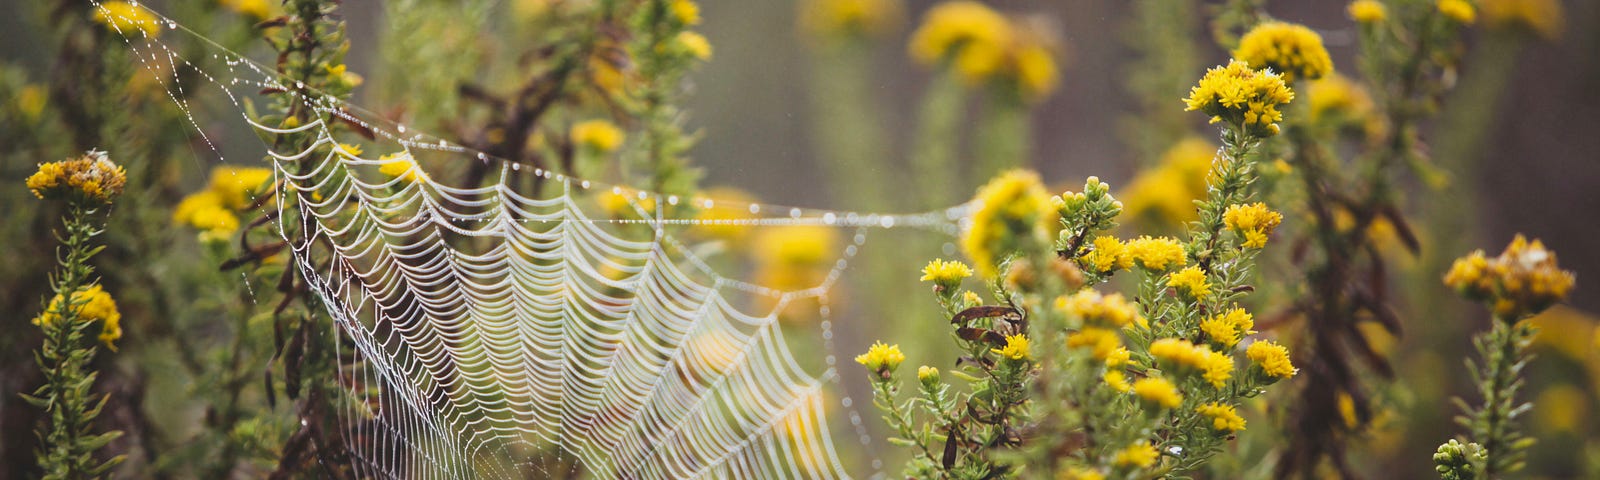 Closeup of a spider web in a sunny field of wildflowers